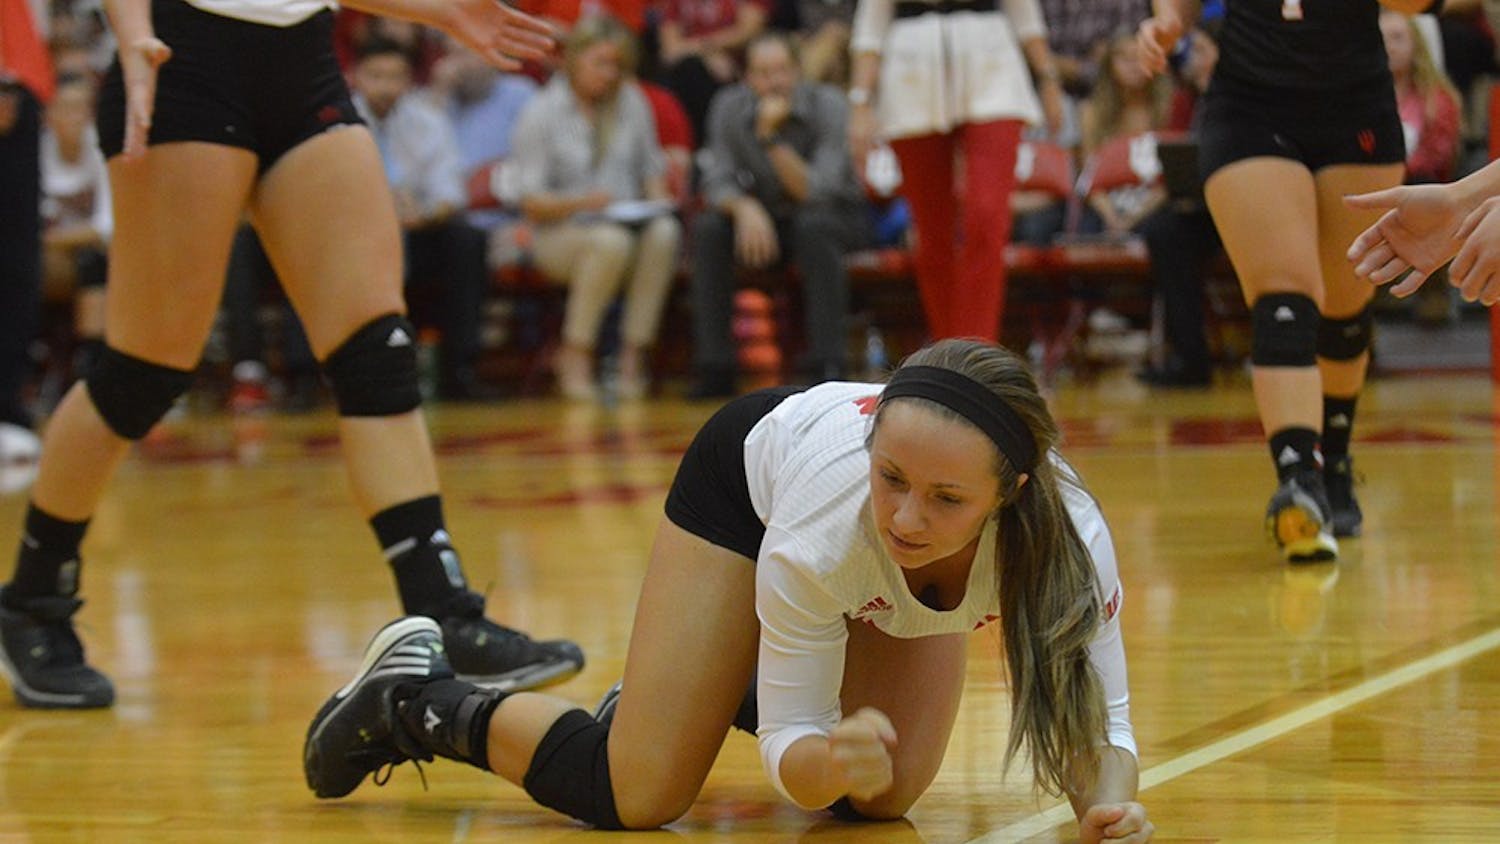 Senior defensive specialist Kyndall Merritt pounds her fist on the floor after missing a ball during the match against Purdue Wednesday evening at University Gym. The Hoosier lost to the Boilermakers 3 matches to 0.